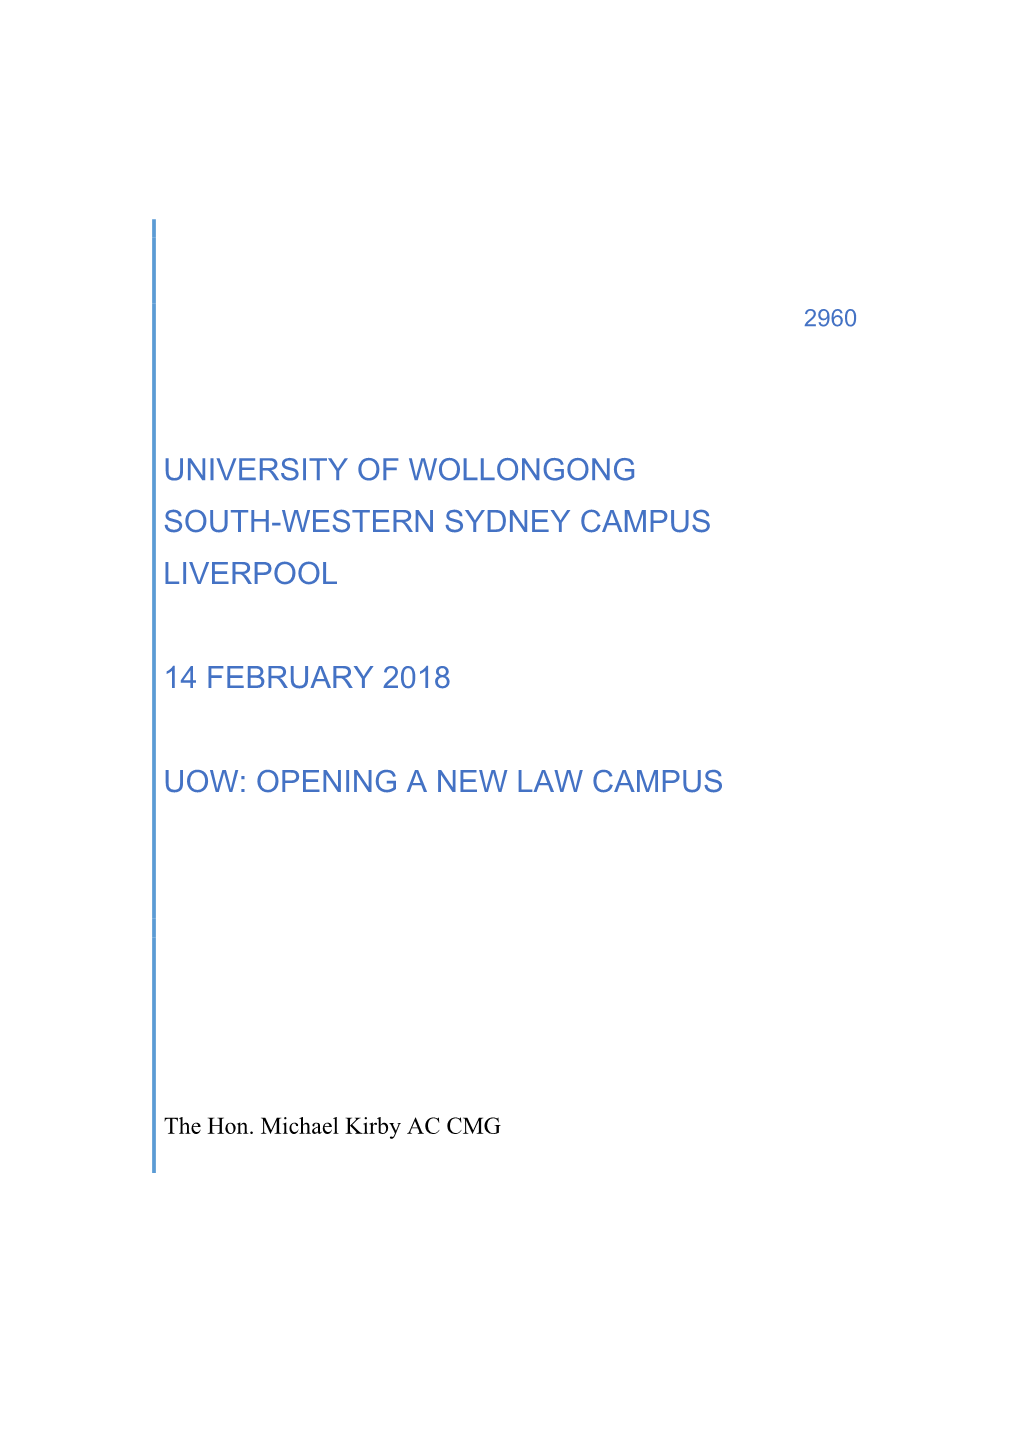 University of Wollongong South-Western Sydney Campus Liverpool 14 February 2018